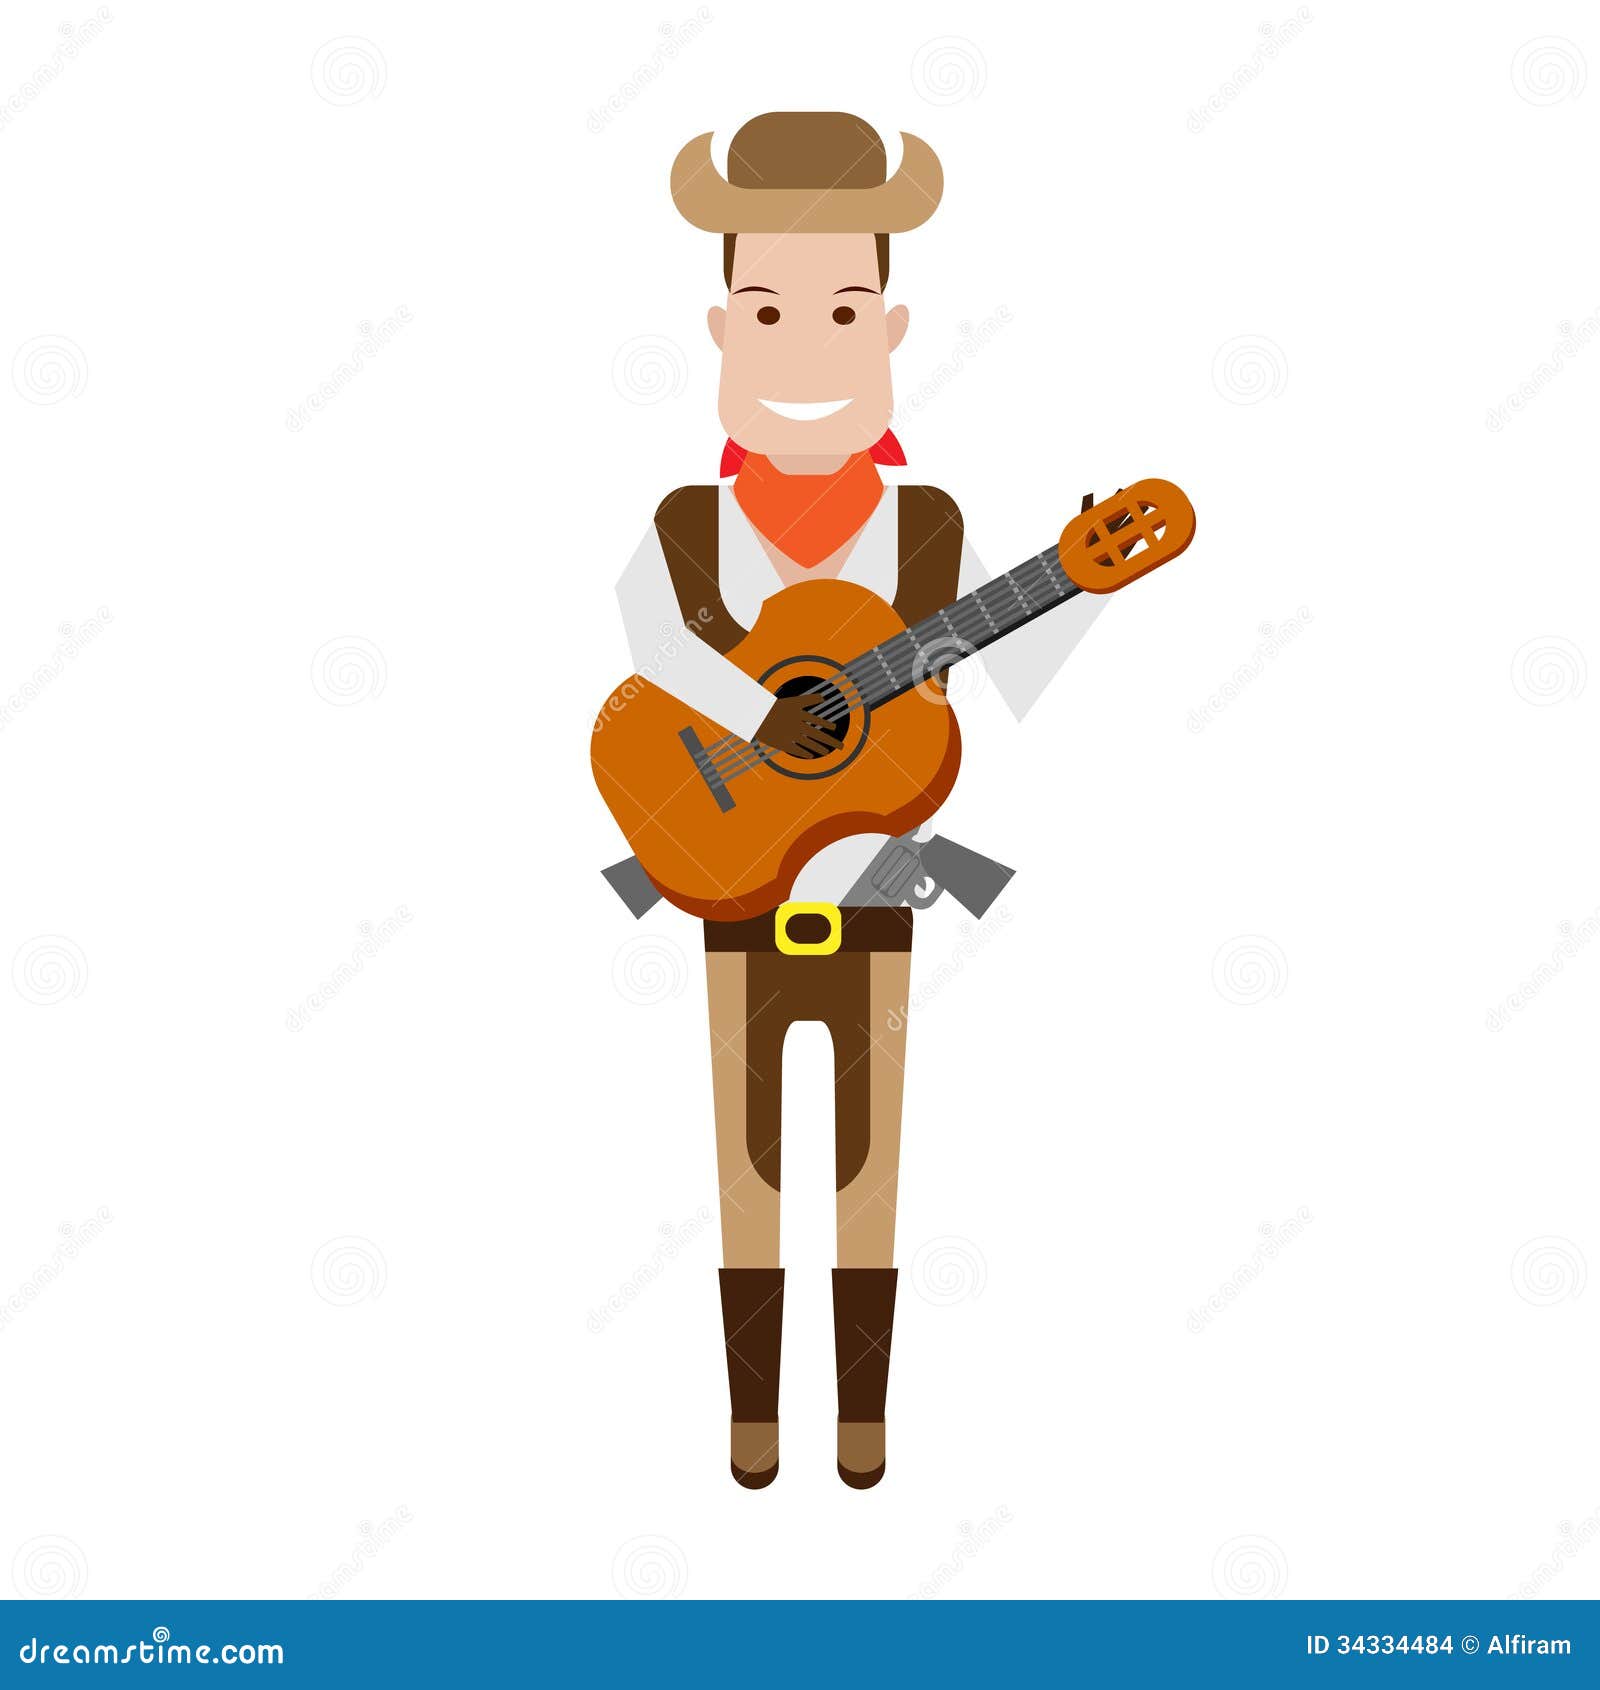 Cowboy holds a guitar stock vector. Illustration of cowboy - 34334484